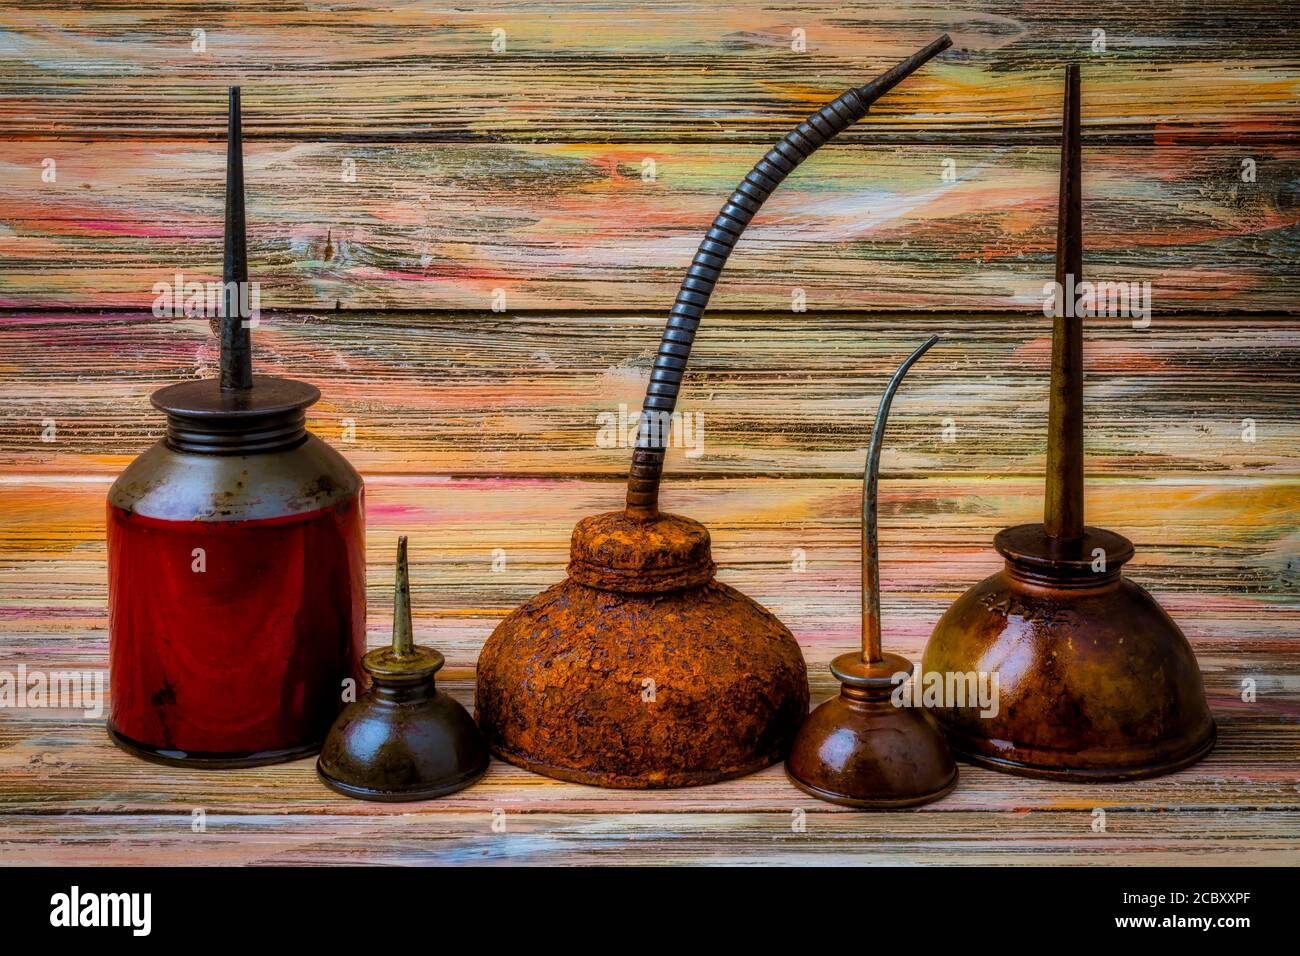 Old Rusty Oil Cans Stock Photo